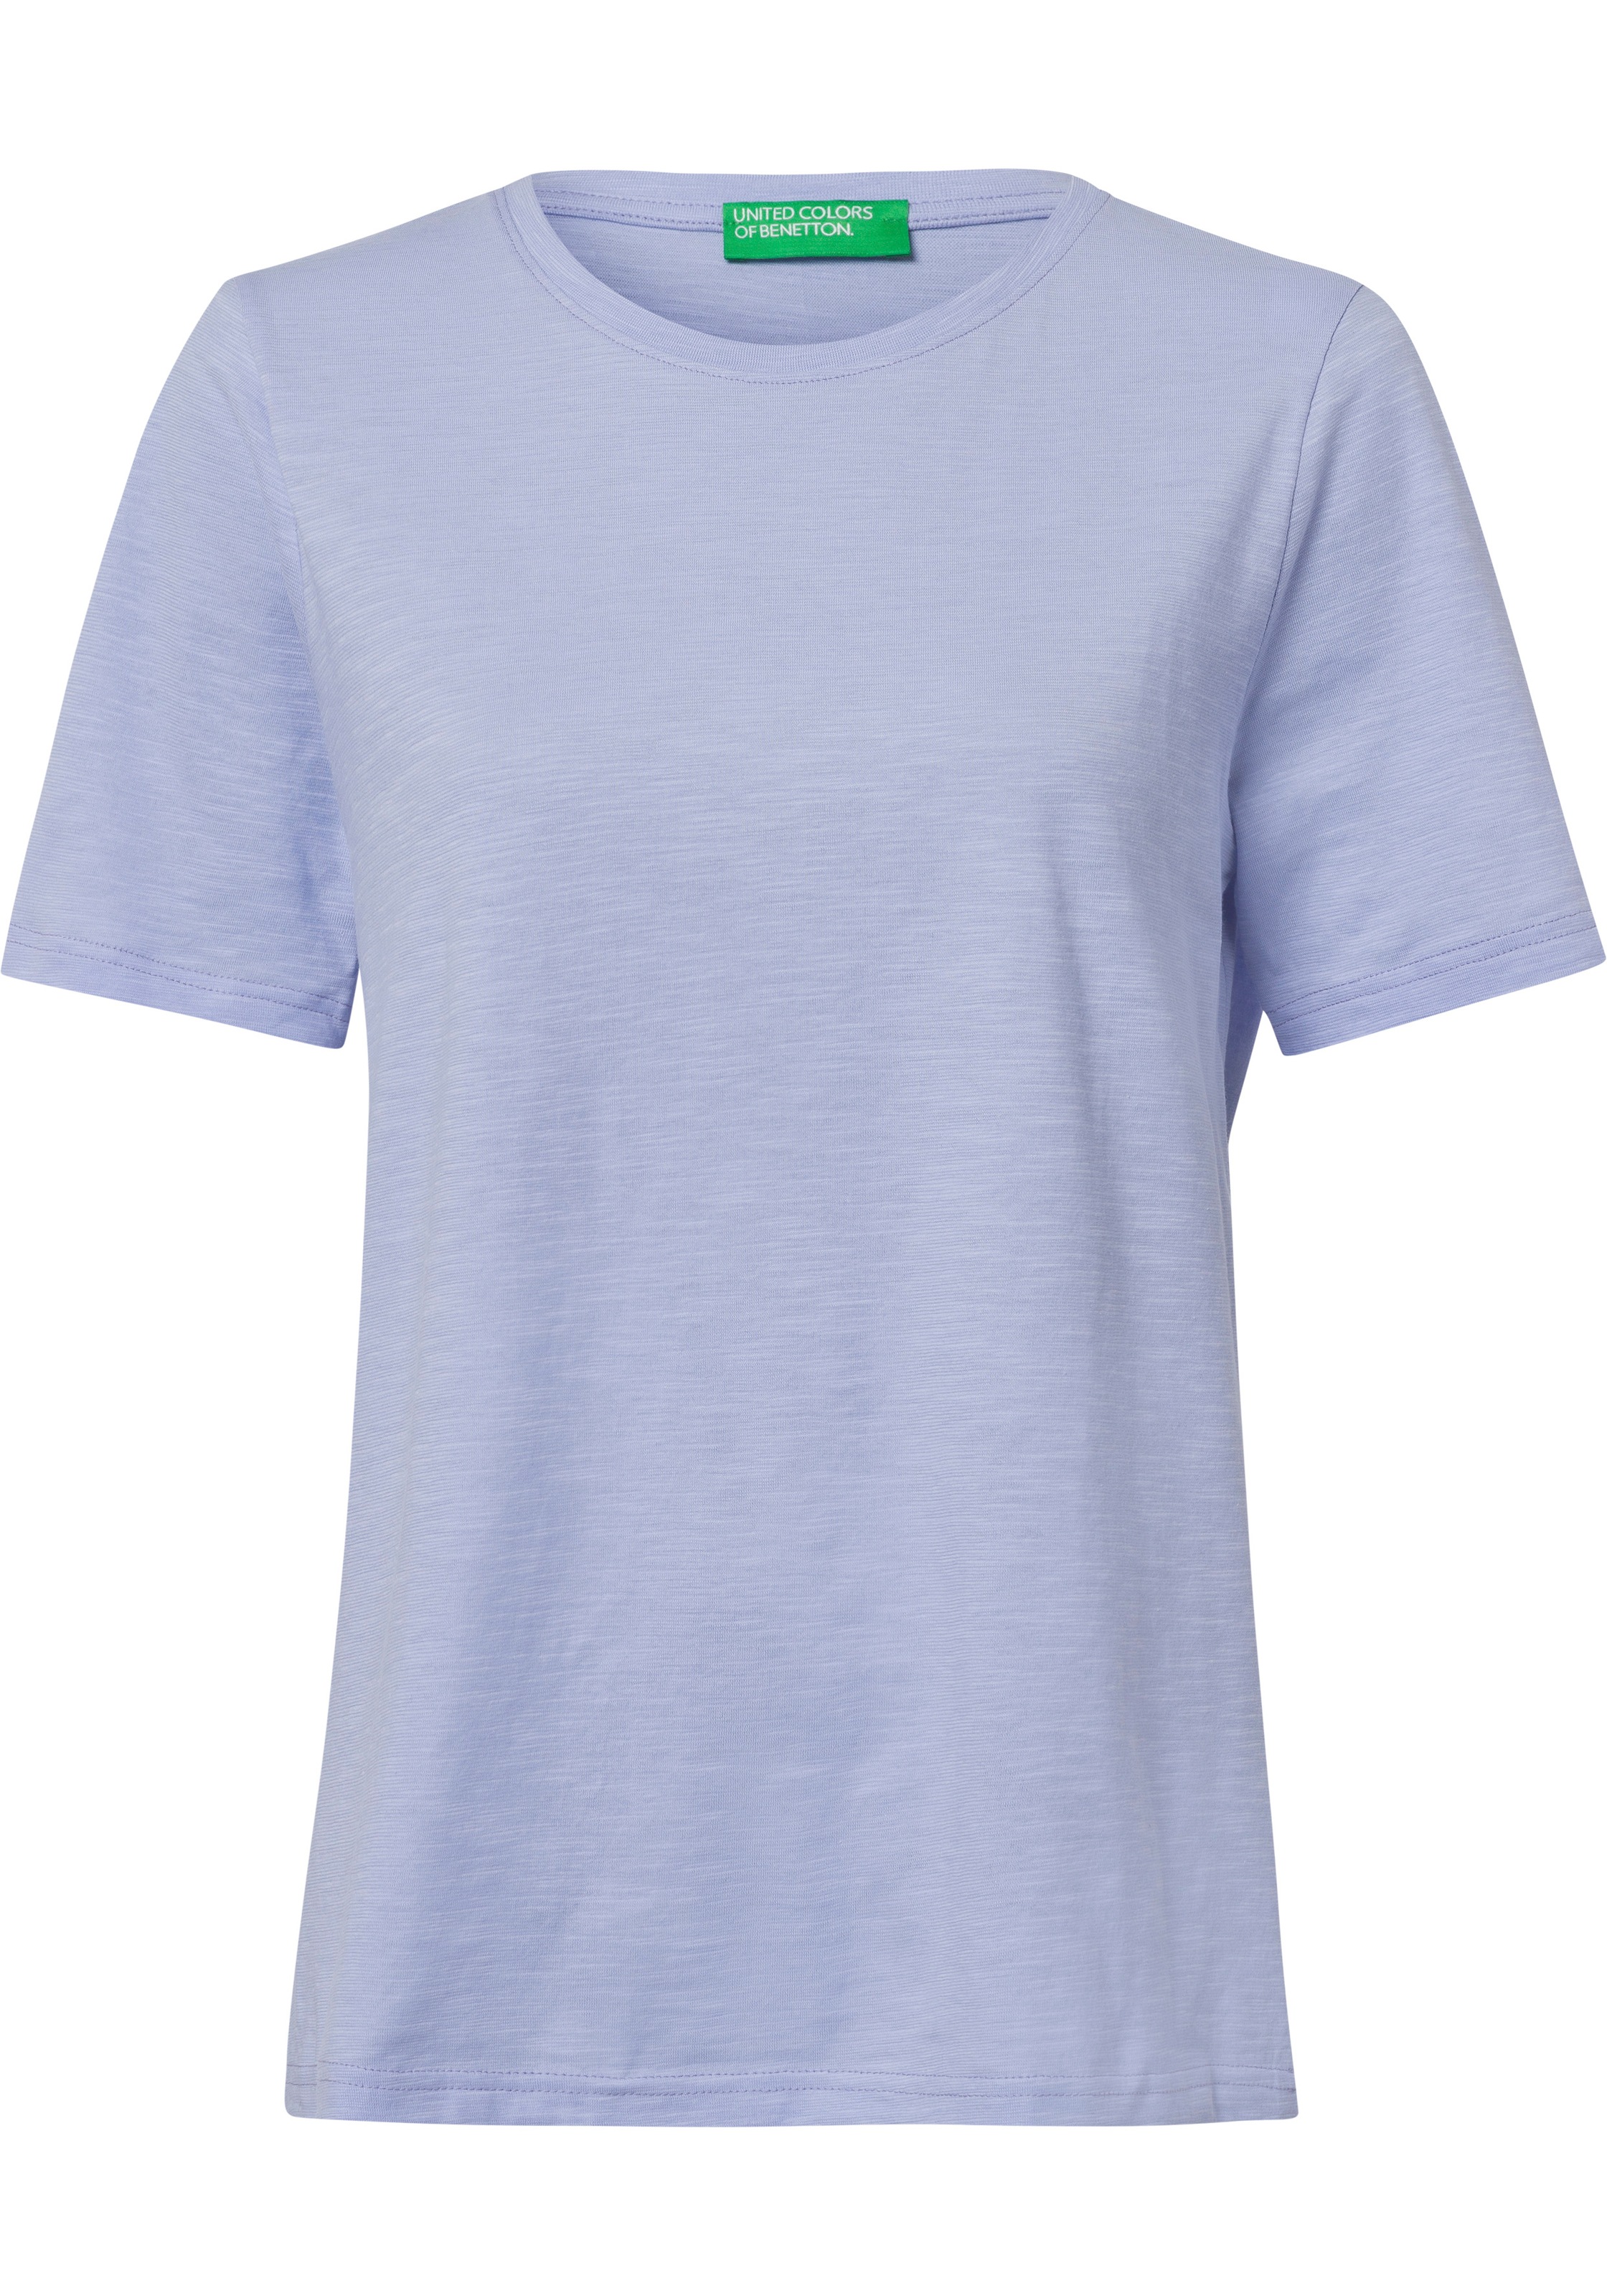 United in Basic-Optik Benetton ♕ Colors T-Shirt, of bei cleaner